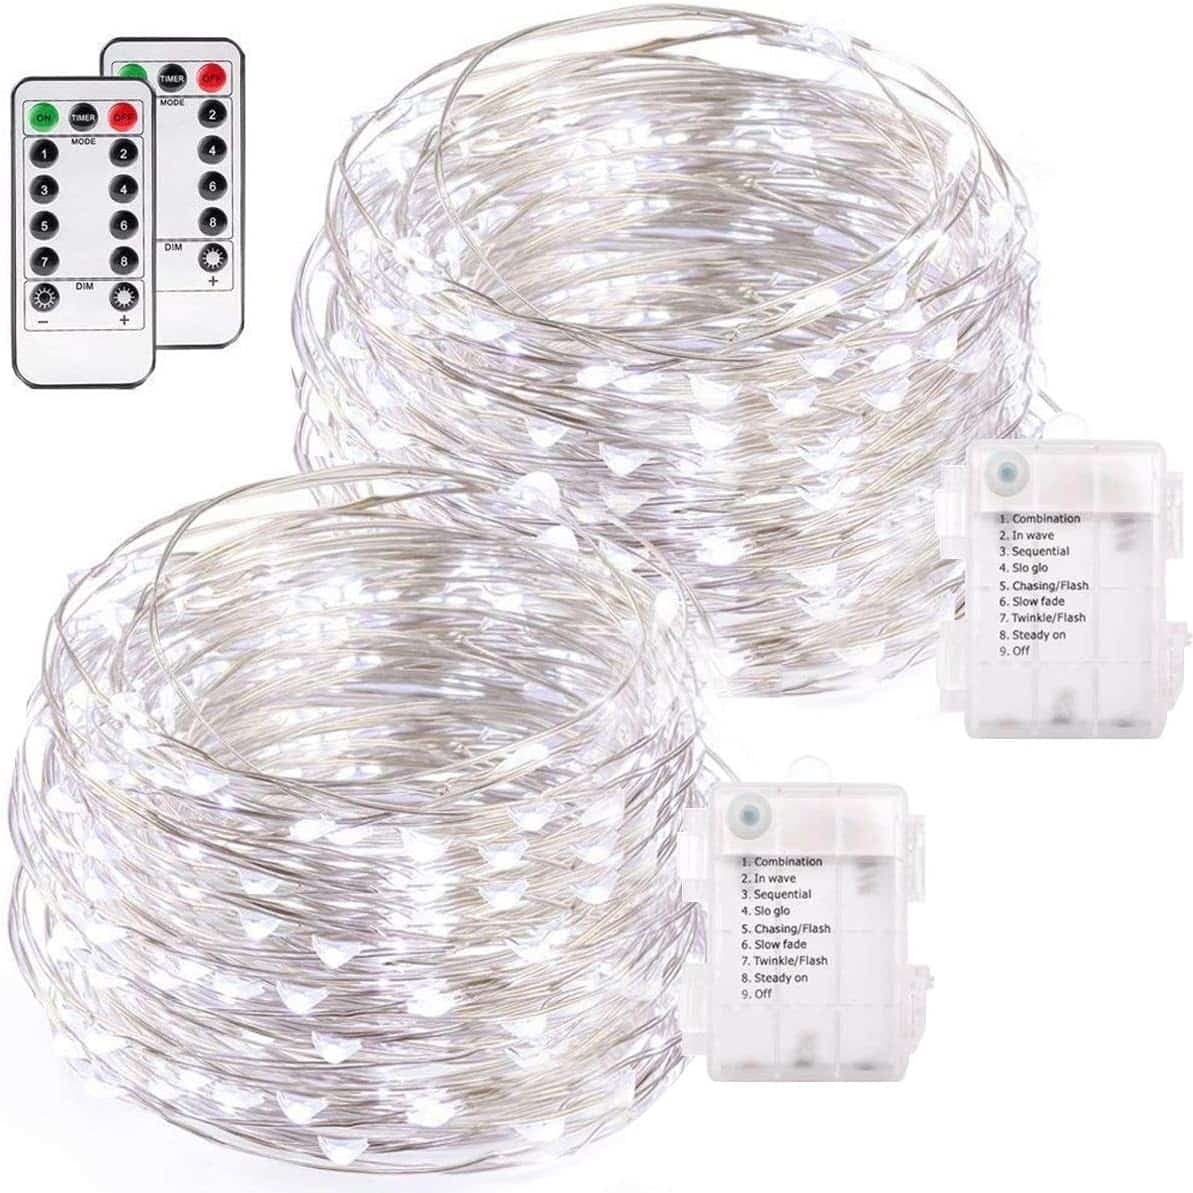 buways Fairy Lights,2-Pack Battery Operated Waterproof Multicolor 50 LED Fairy String Lights,16.4ft Silver Wire Light with Remote Control for Christmas Parties,Garden and Home Decoration